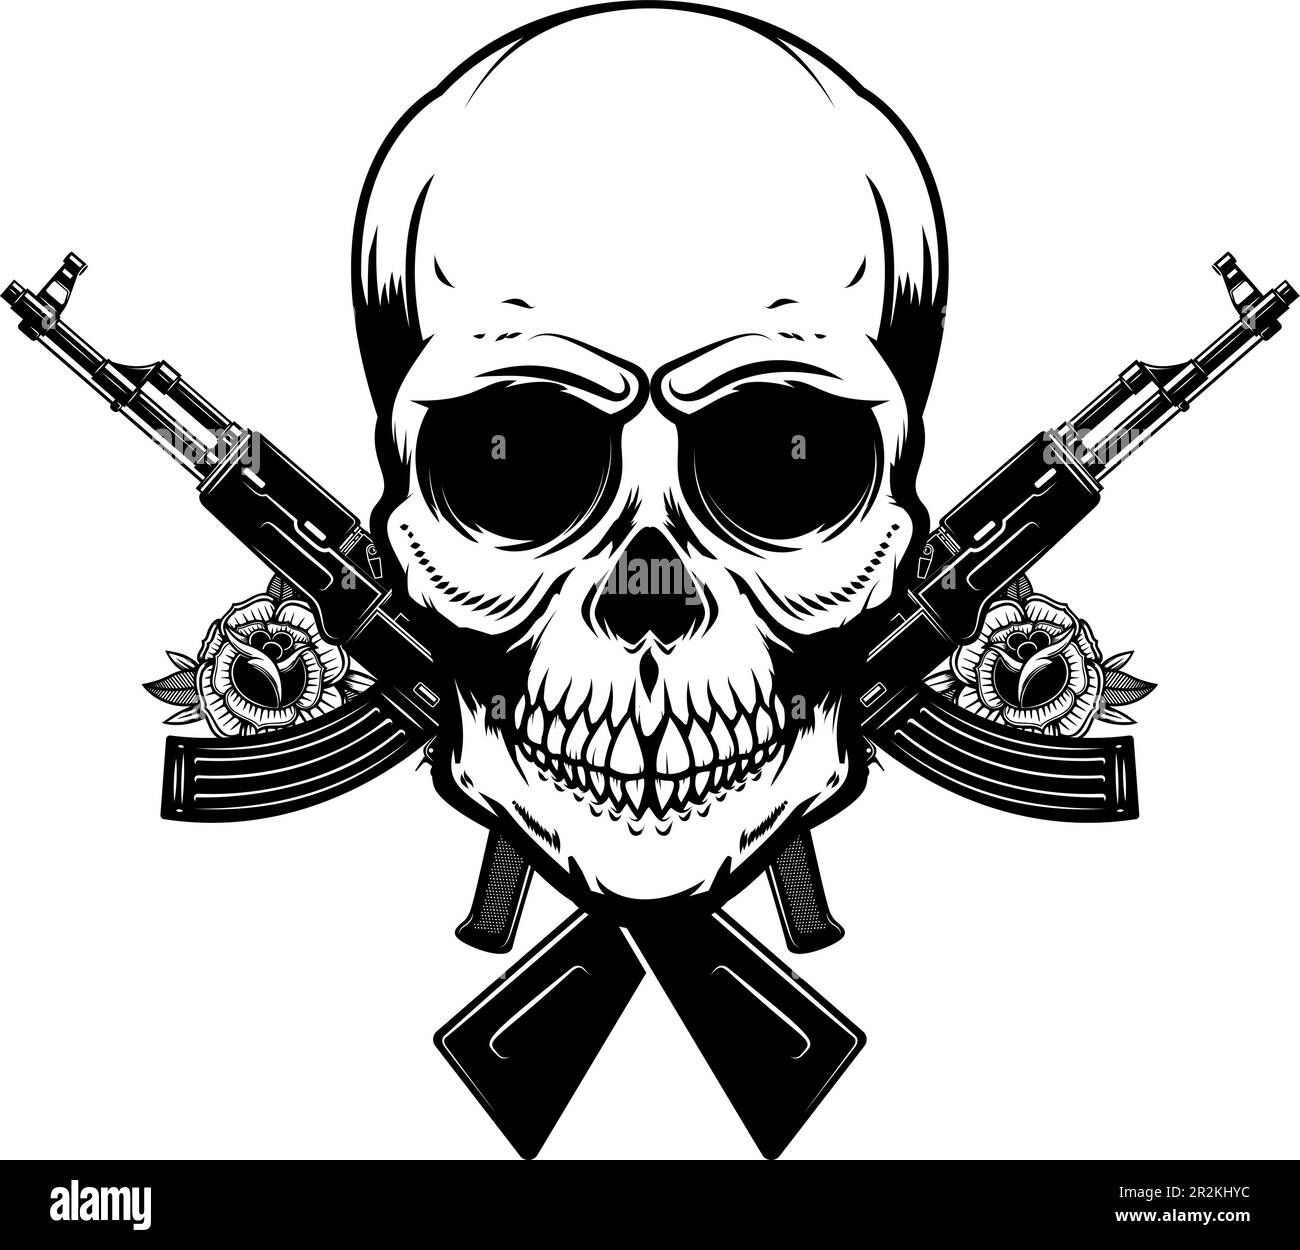 Illustration of the skull with crossed assault rifles. Design element for logo, label, sign, emblem. Vector illustration, Illustration of the skull wi Stock Vector